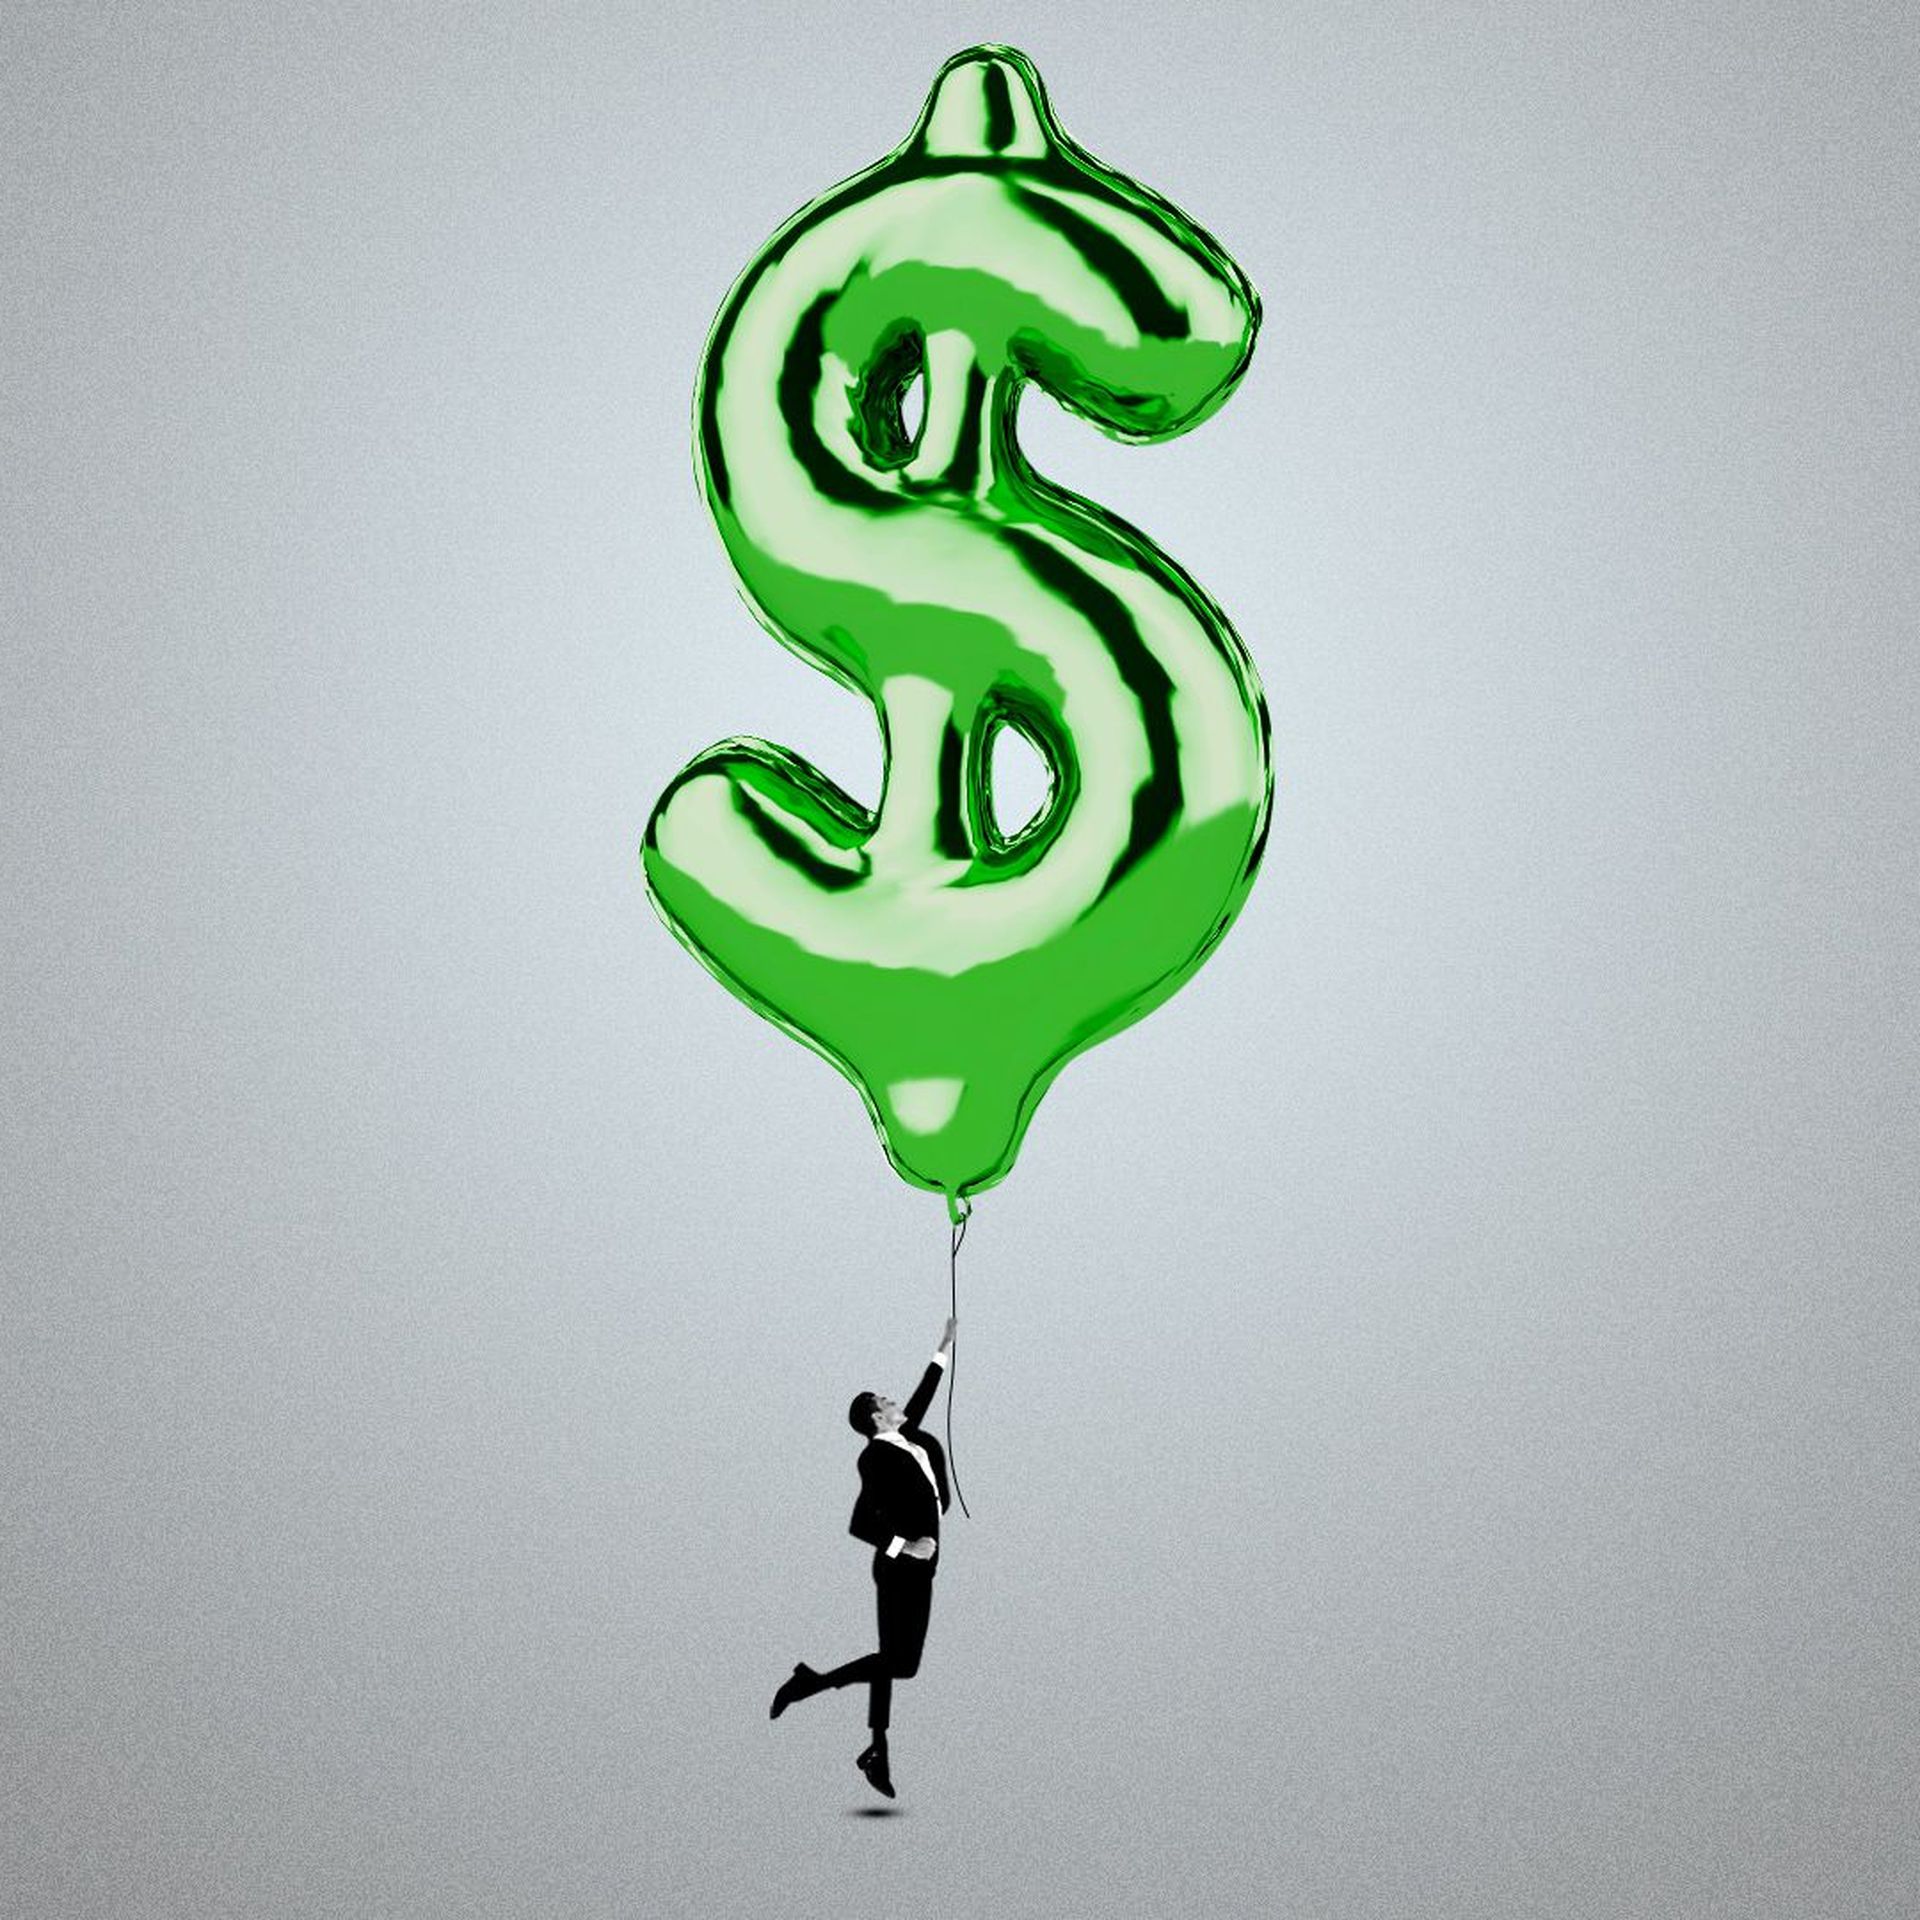 Illustration of a large dollar bill sign balloon being held by a man who is floating slightly off the ground. 